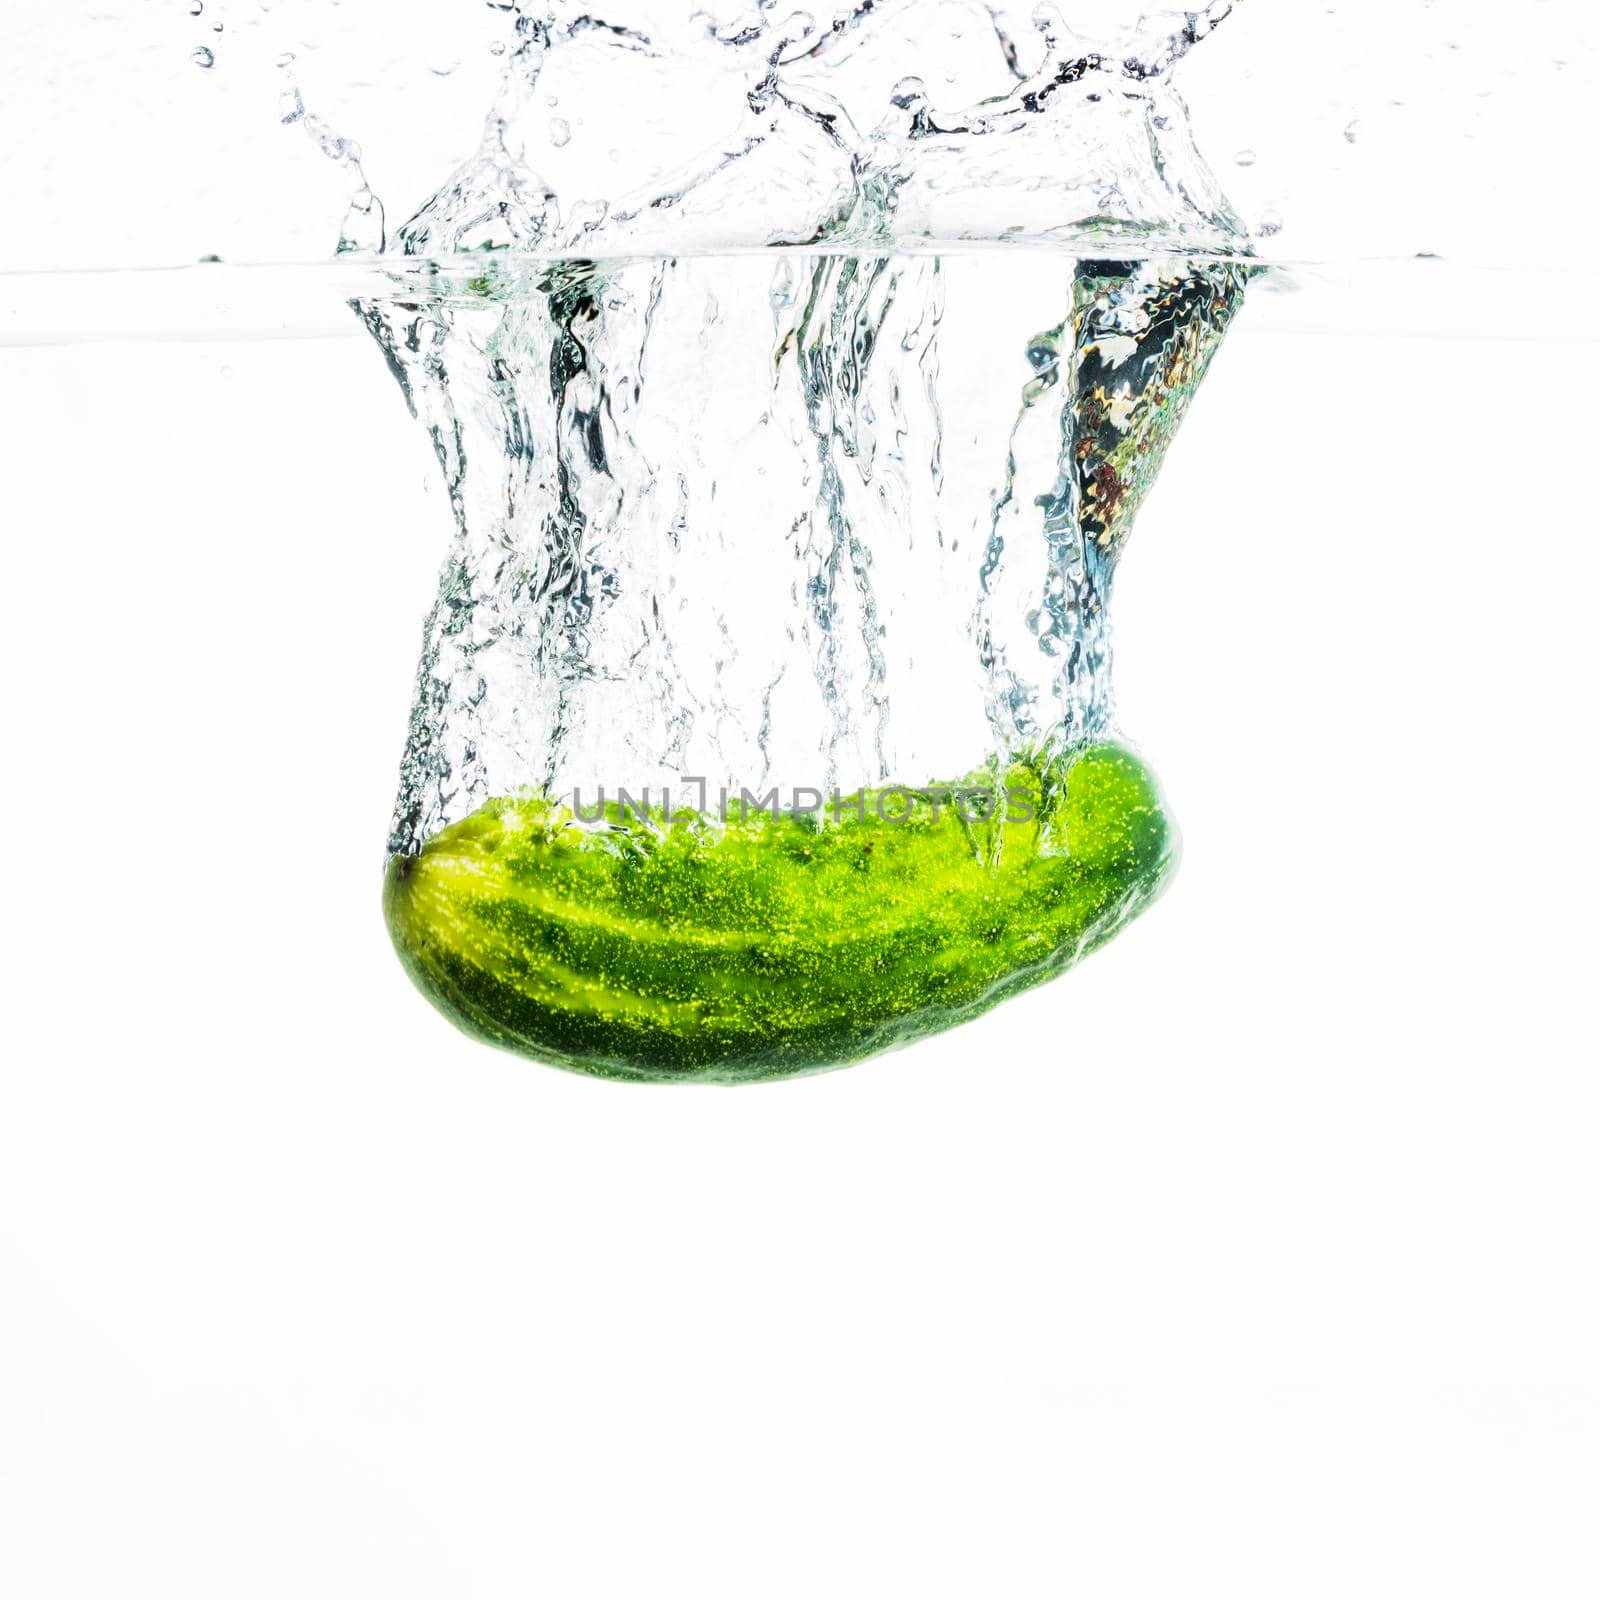 cucumber falling water water splash against white background. High quality photo by Zahard